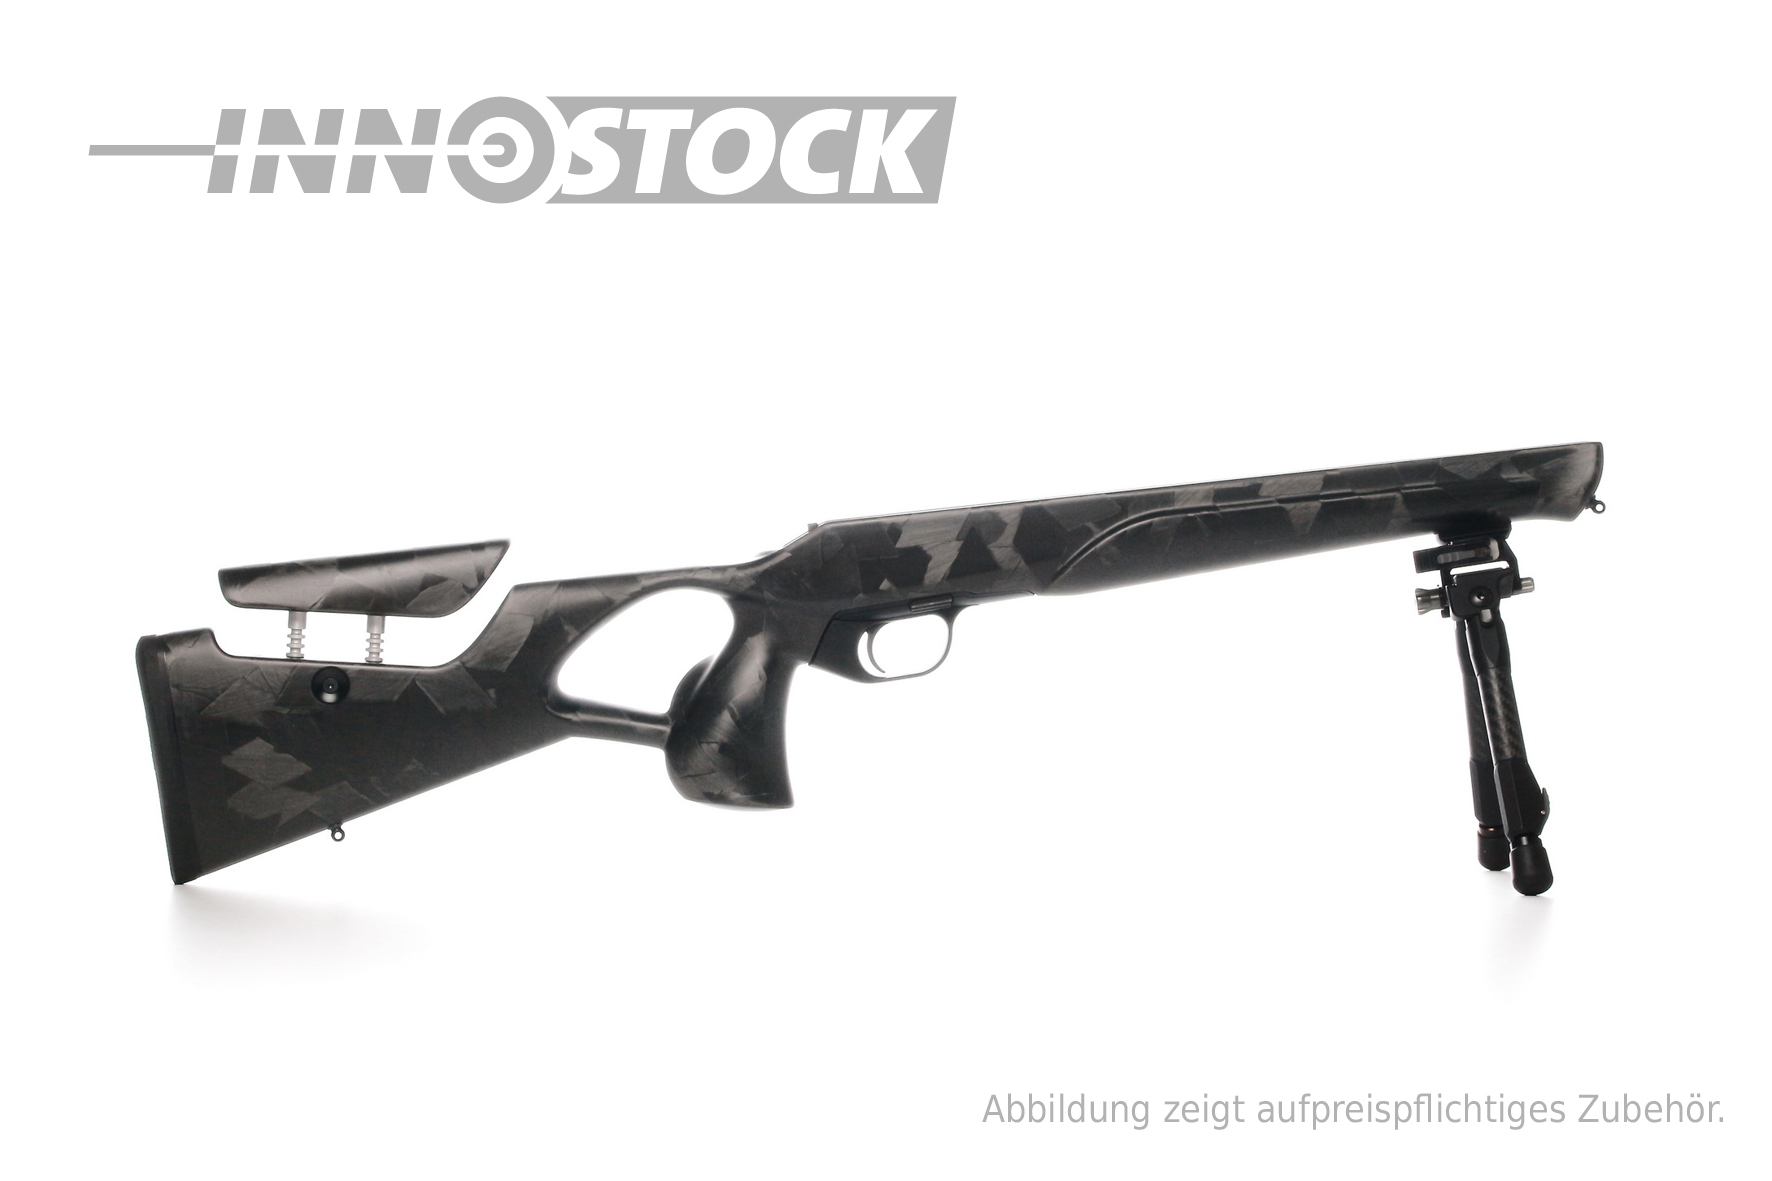 Carbon Stock - M932 - for System Blaser R93 - Semi Weigh - Carbon Camo - inkl. Spartan Adapter